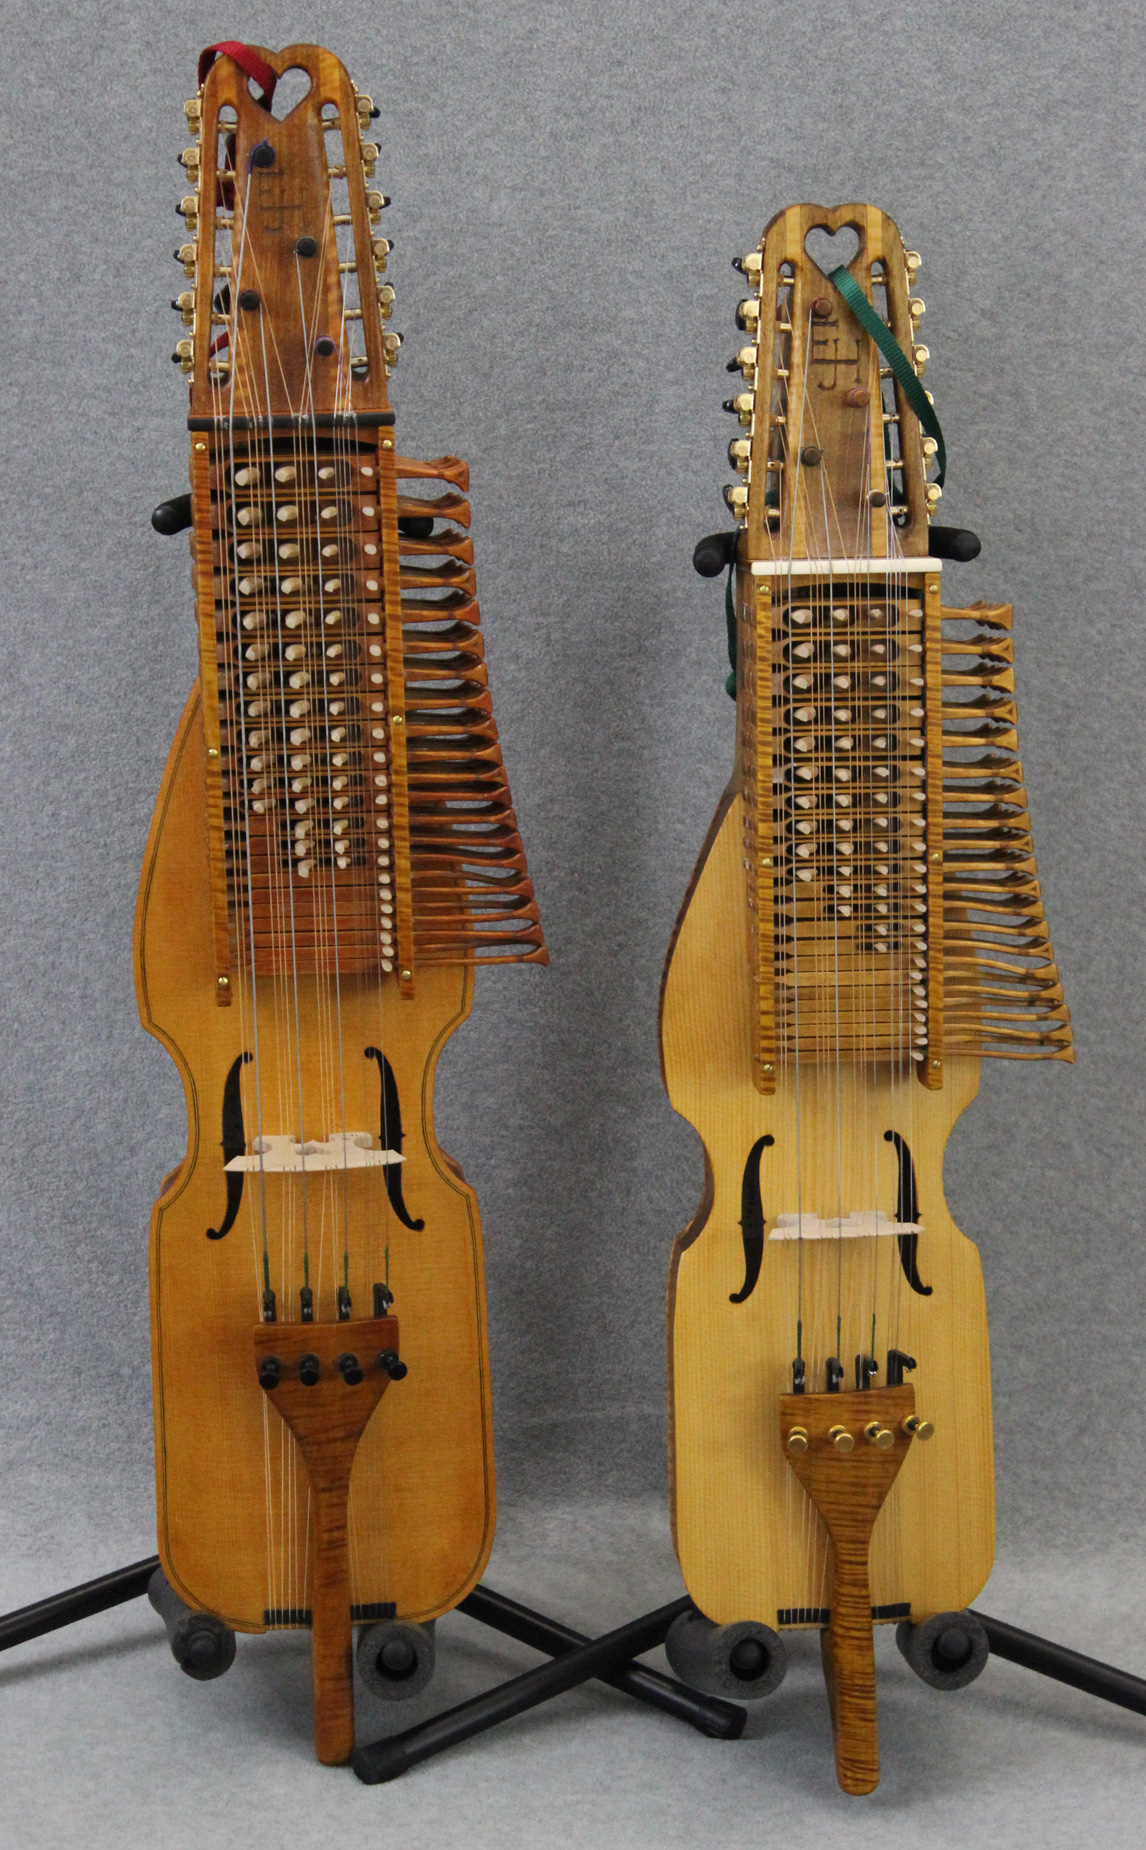 alto and soprano with different color finishes